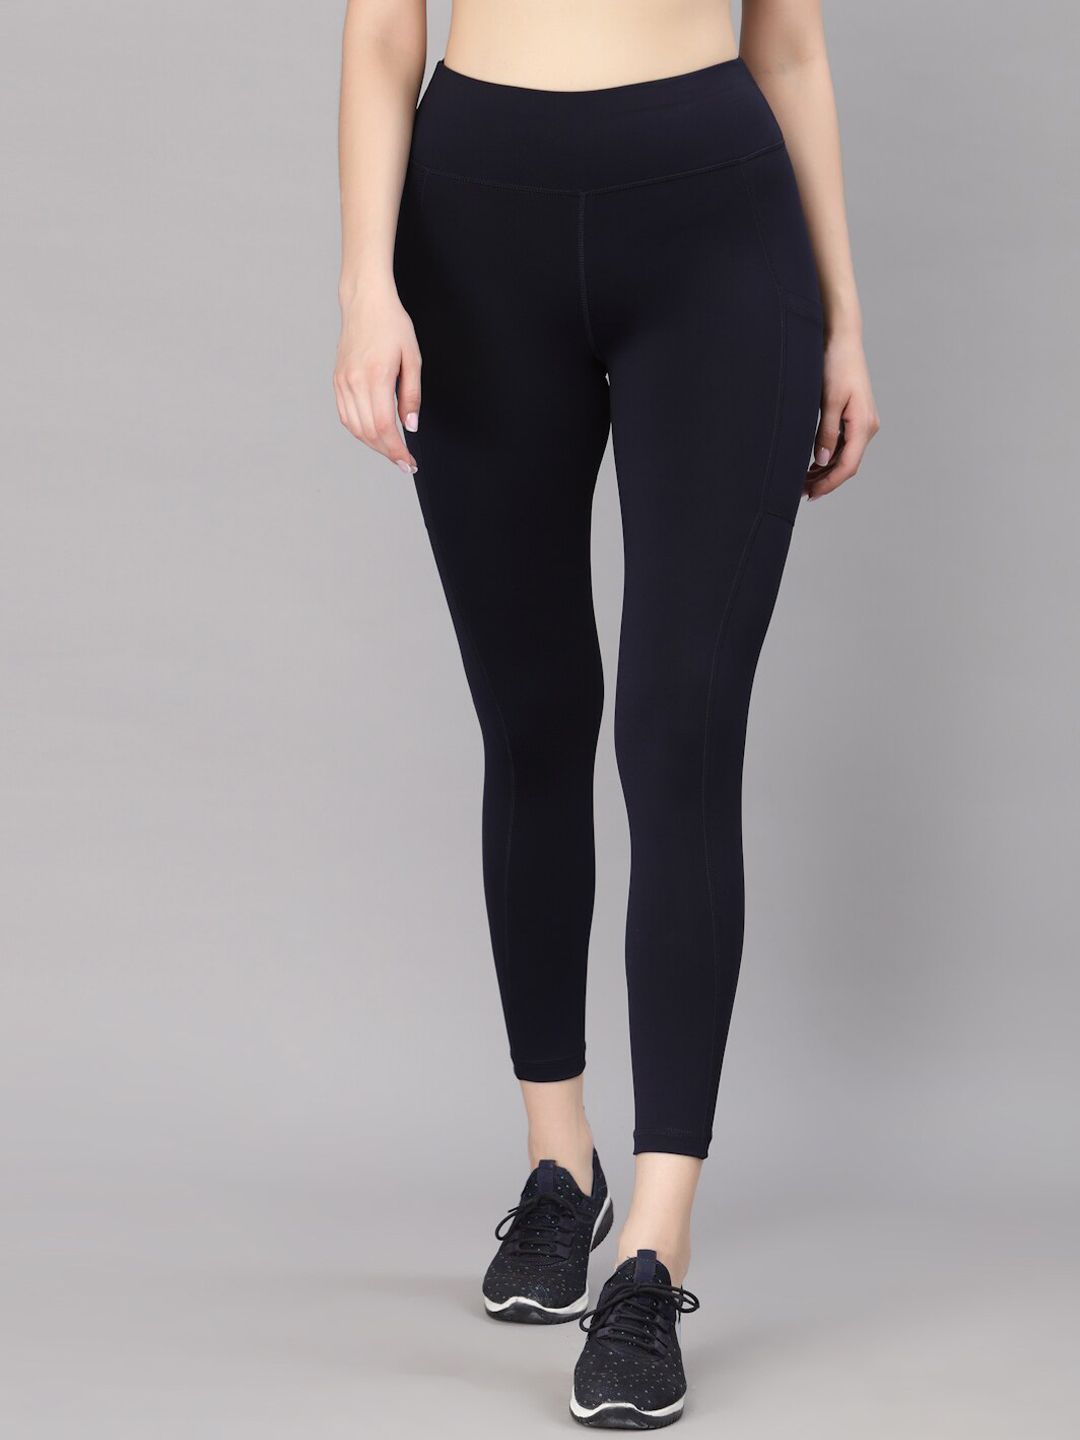 JUMP USA Women Rapid Dry Solid Tights Price in India